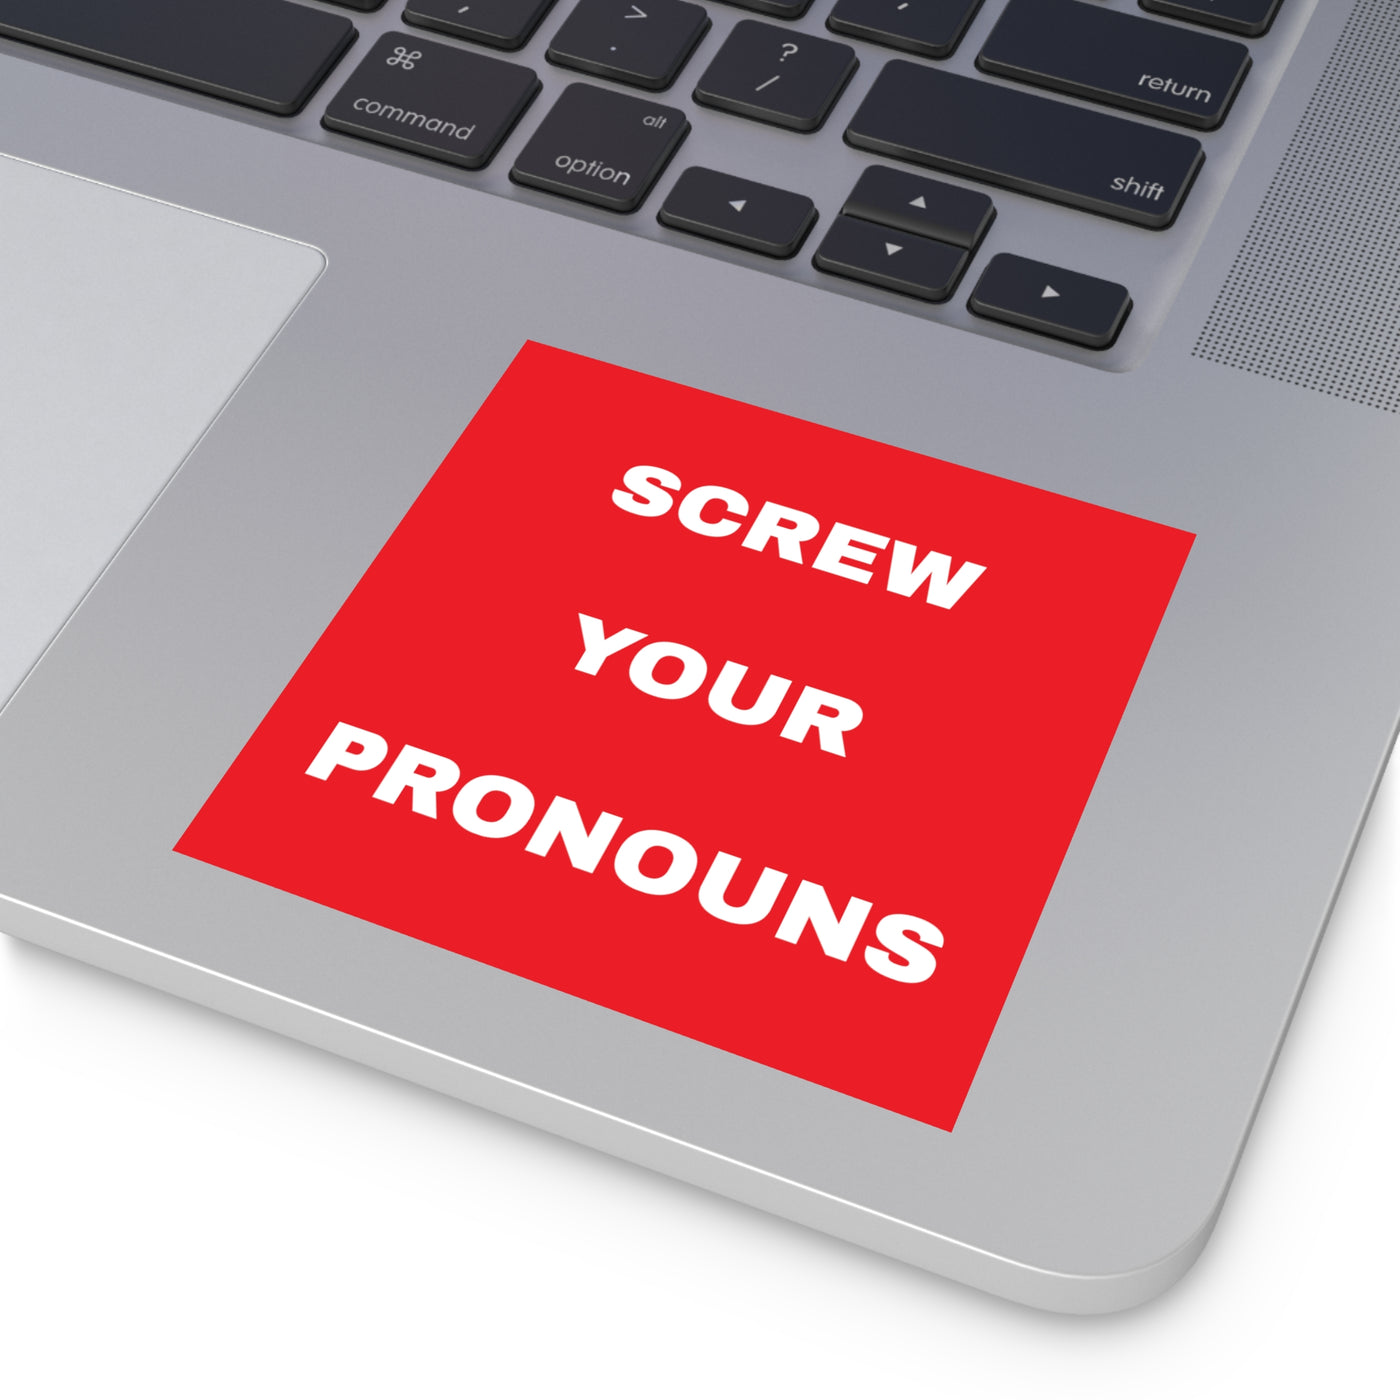 SCREW YOUR PRONOUNS - PATRIOTIC STICKER - Freedom First Supply